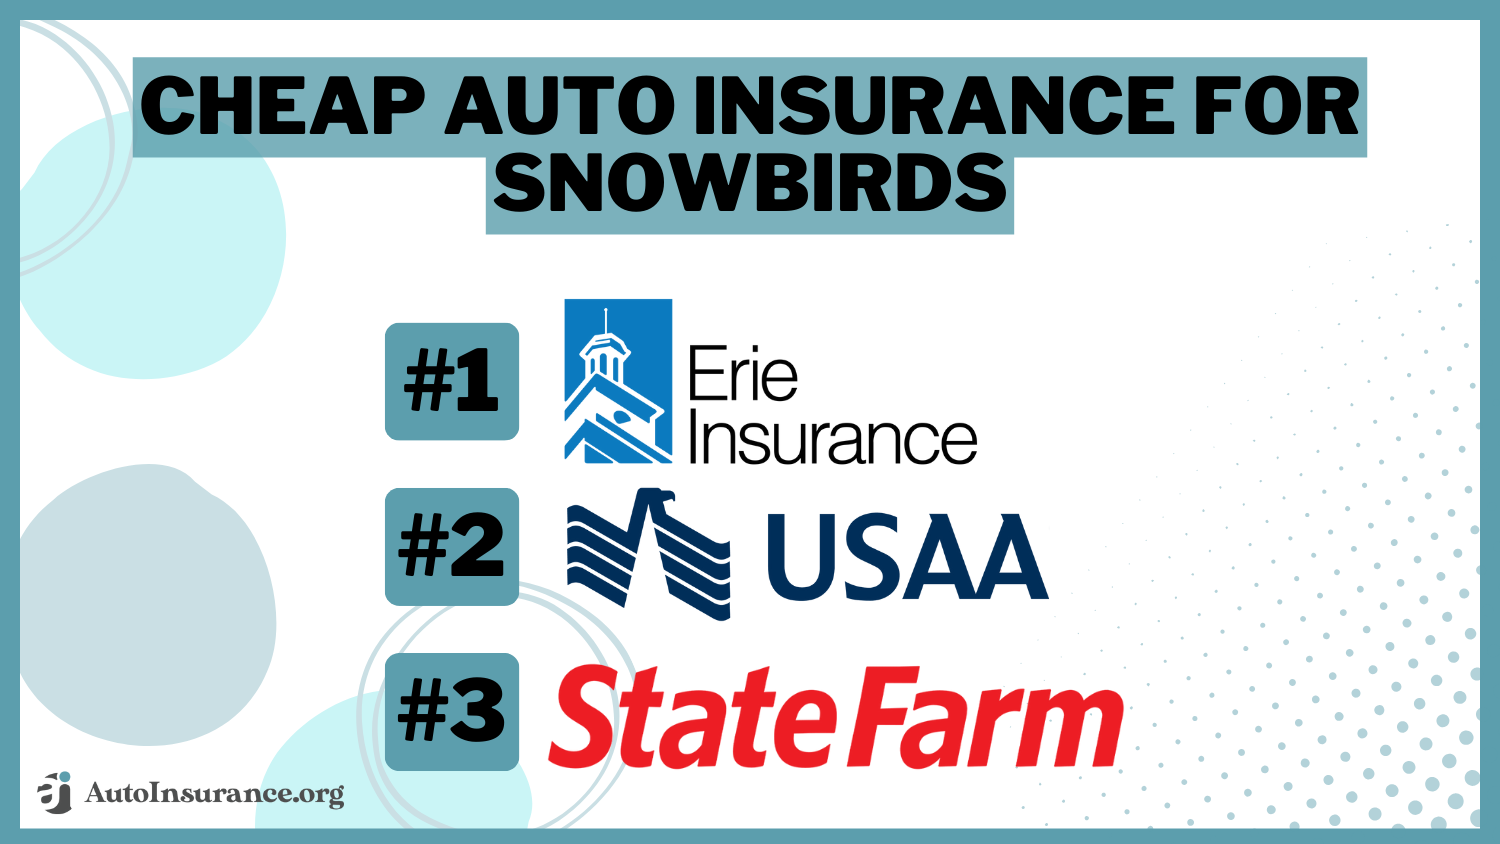 Erie, USAA, and State Farm cheap auto insurance for snowbirds